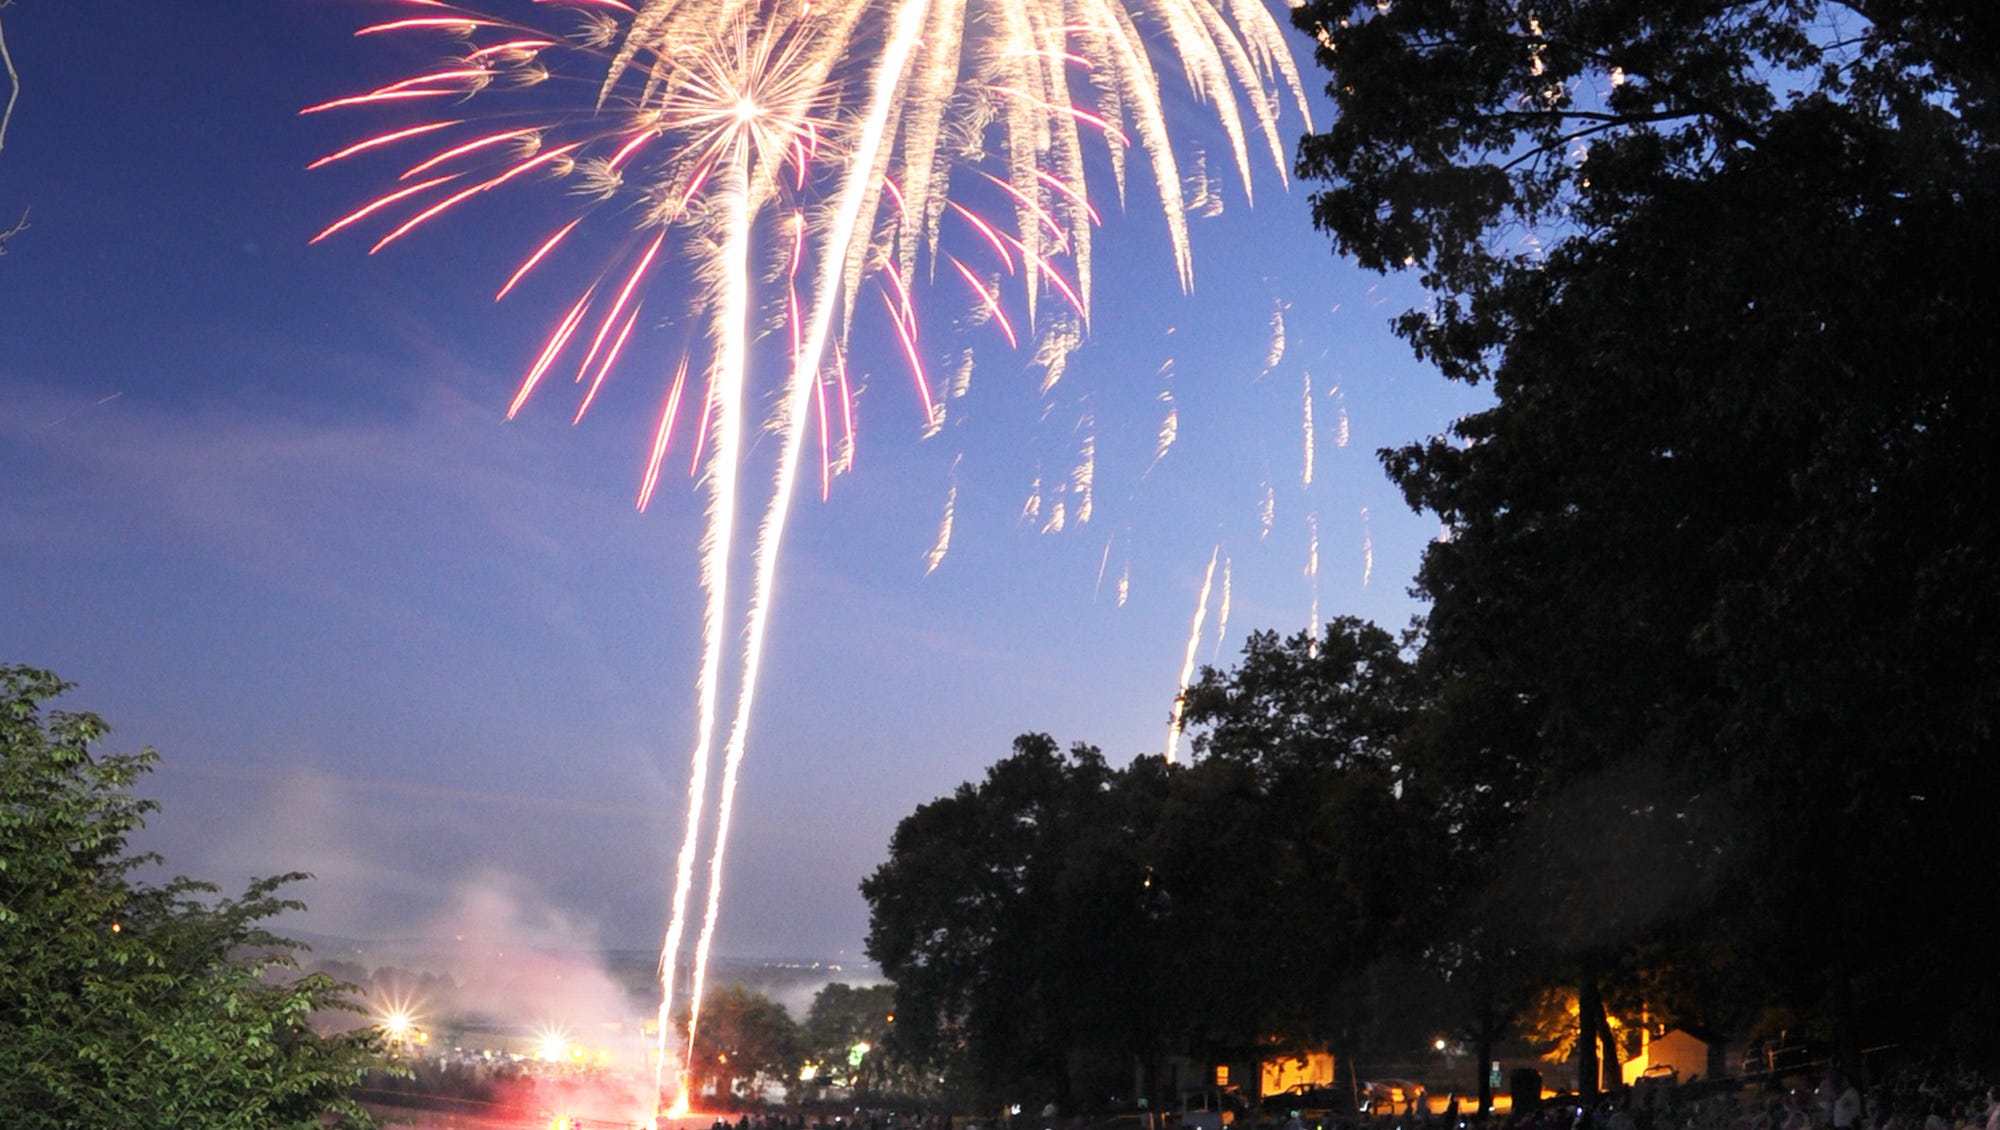 July 4 fireworks a tradition in Lebanon